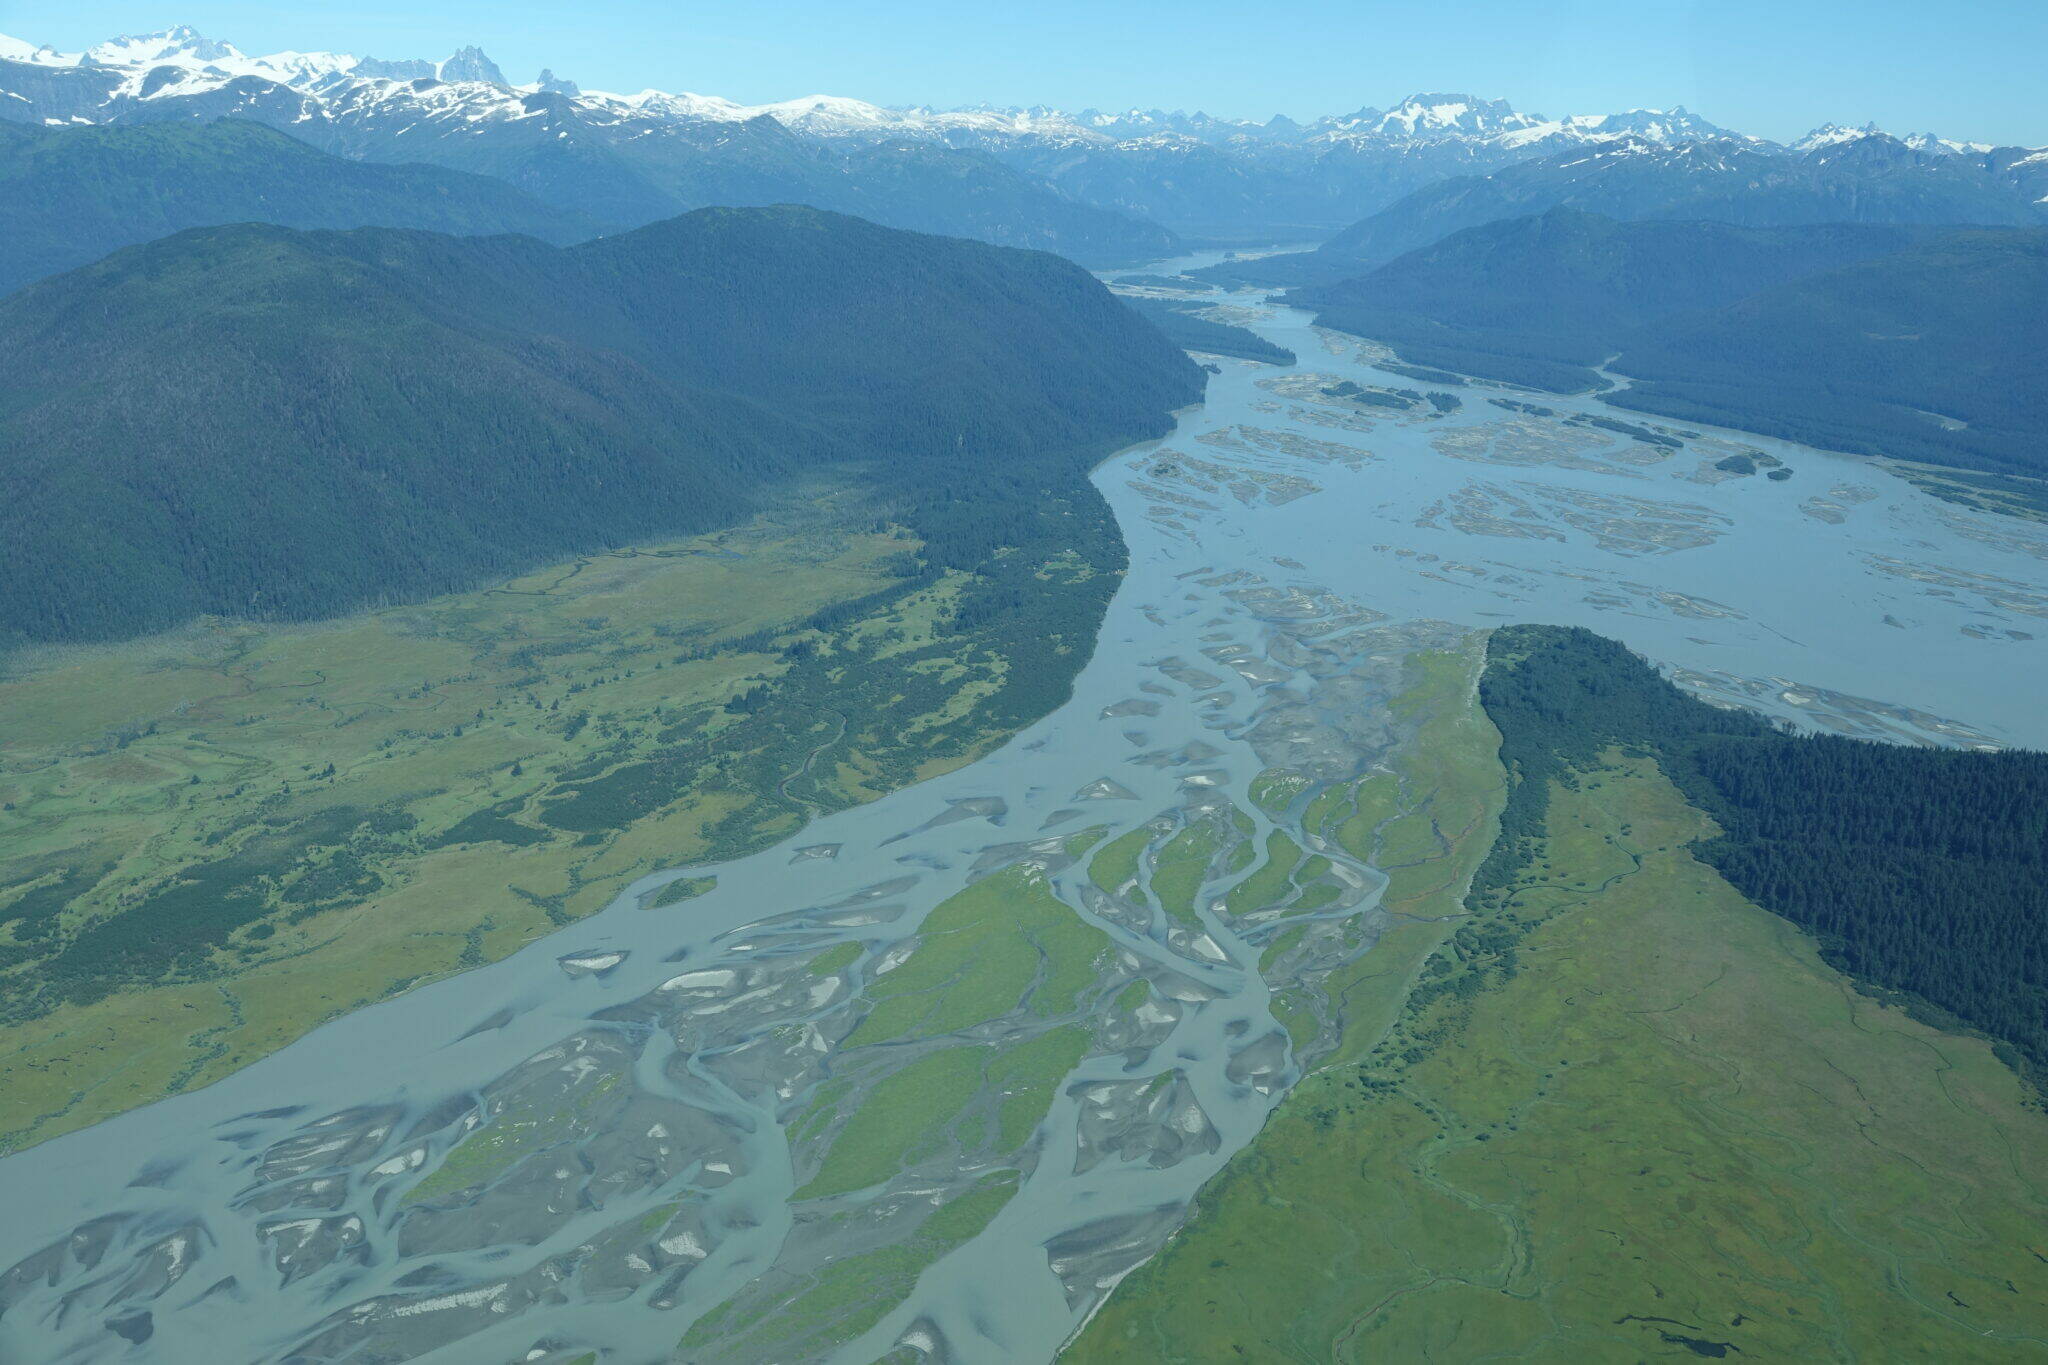 A view of the Stikine River and its delta. (Photo by Mary Catharine Martin)